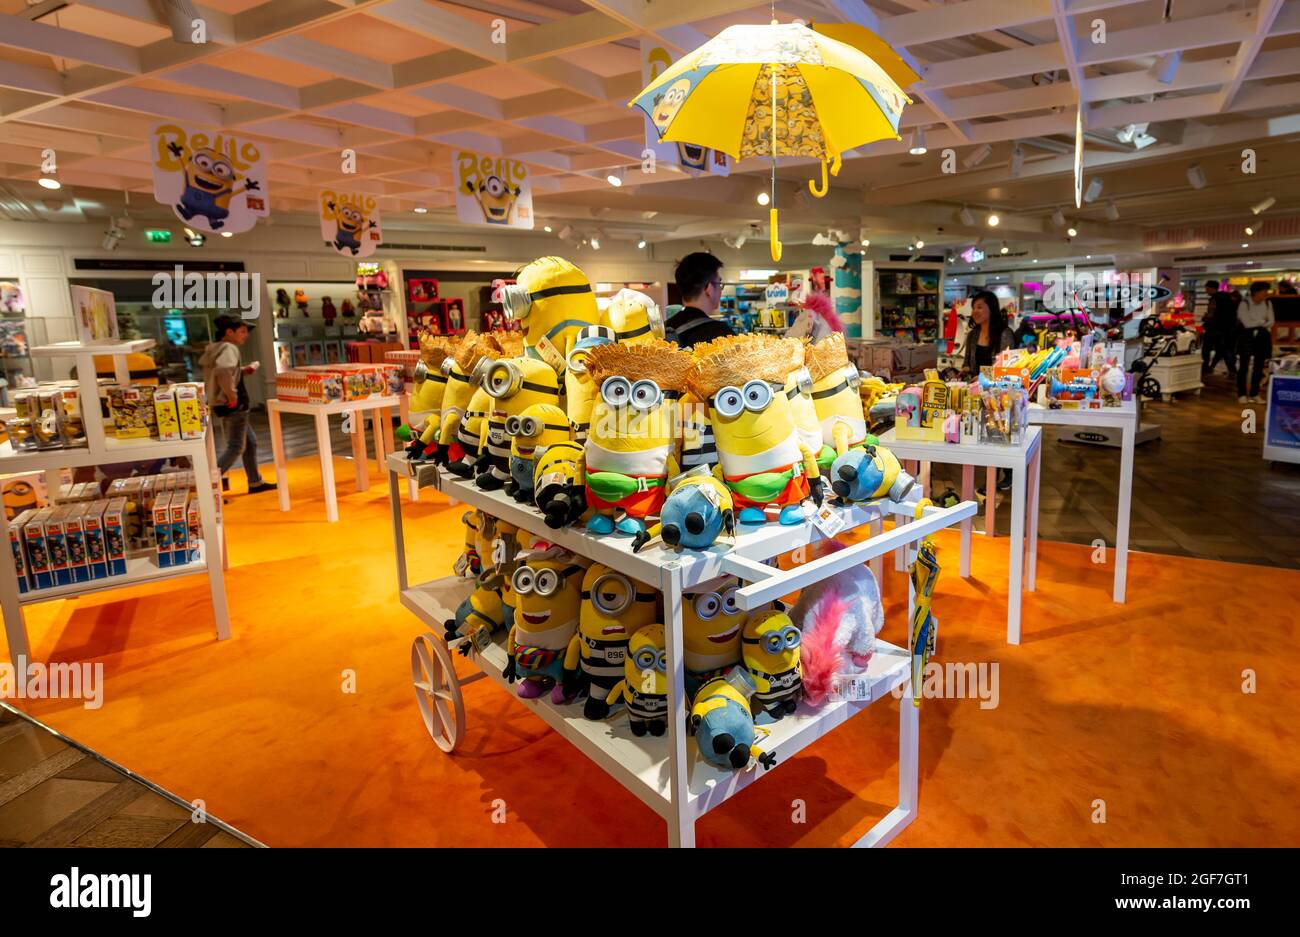 https://c8.alamy.com/comp/2GF7GT1/soft-toys-display-with-plush-minions-figures-toy-department-luxury-department-stores-harrods-london-england-great-britain-2GF7GT1.jpg